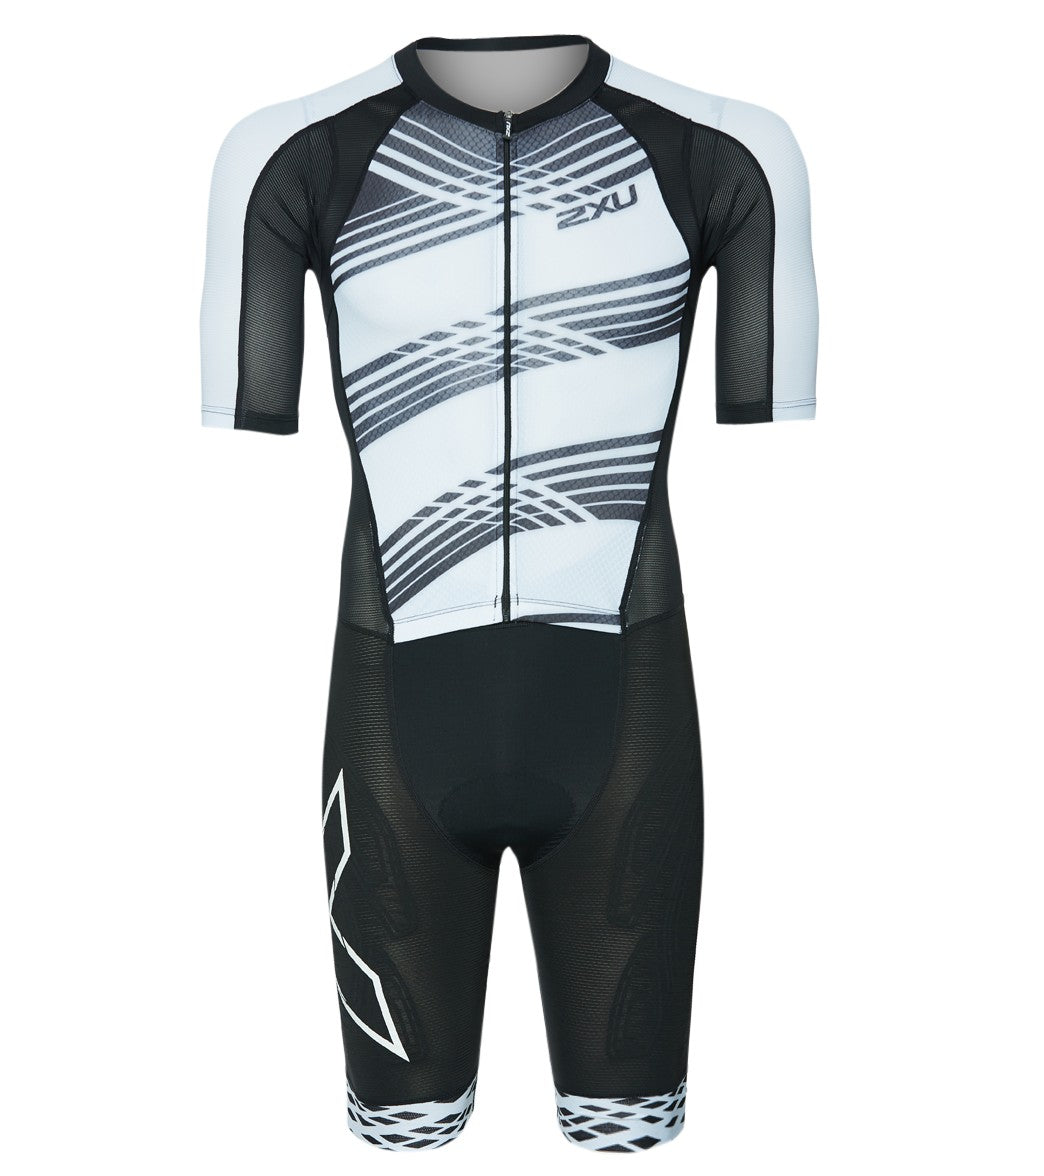 2XU Men's Compression Full Zip Sleeved Tri Suit at SwimOutlet.com